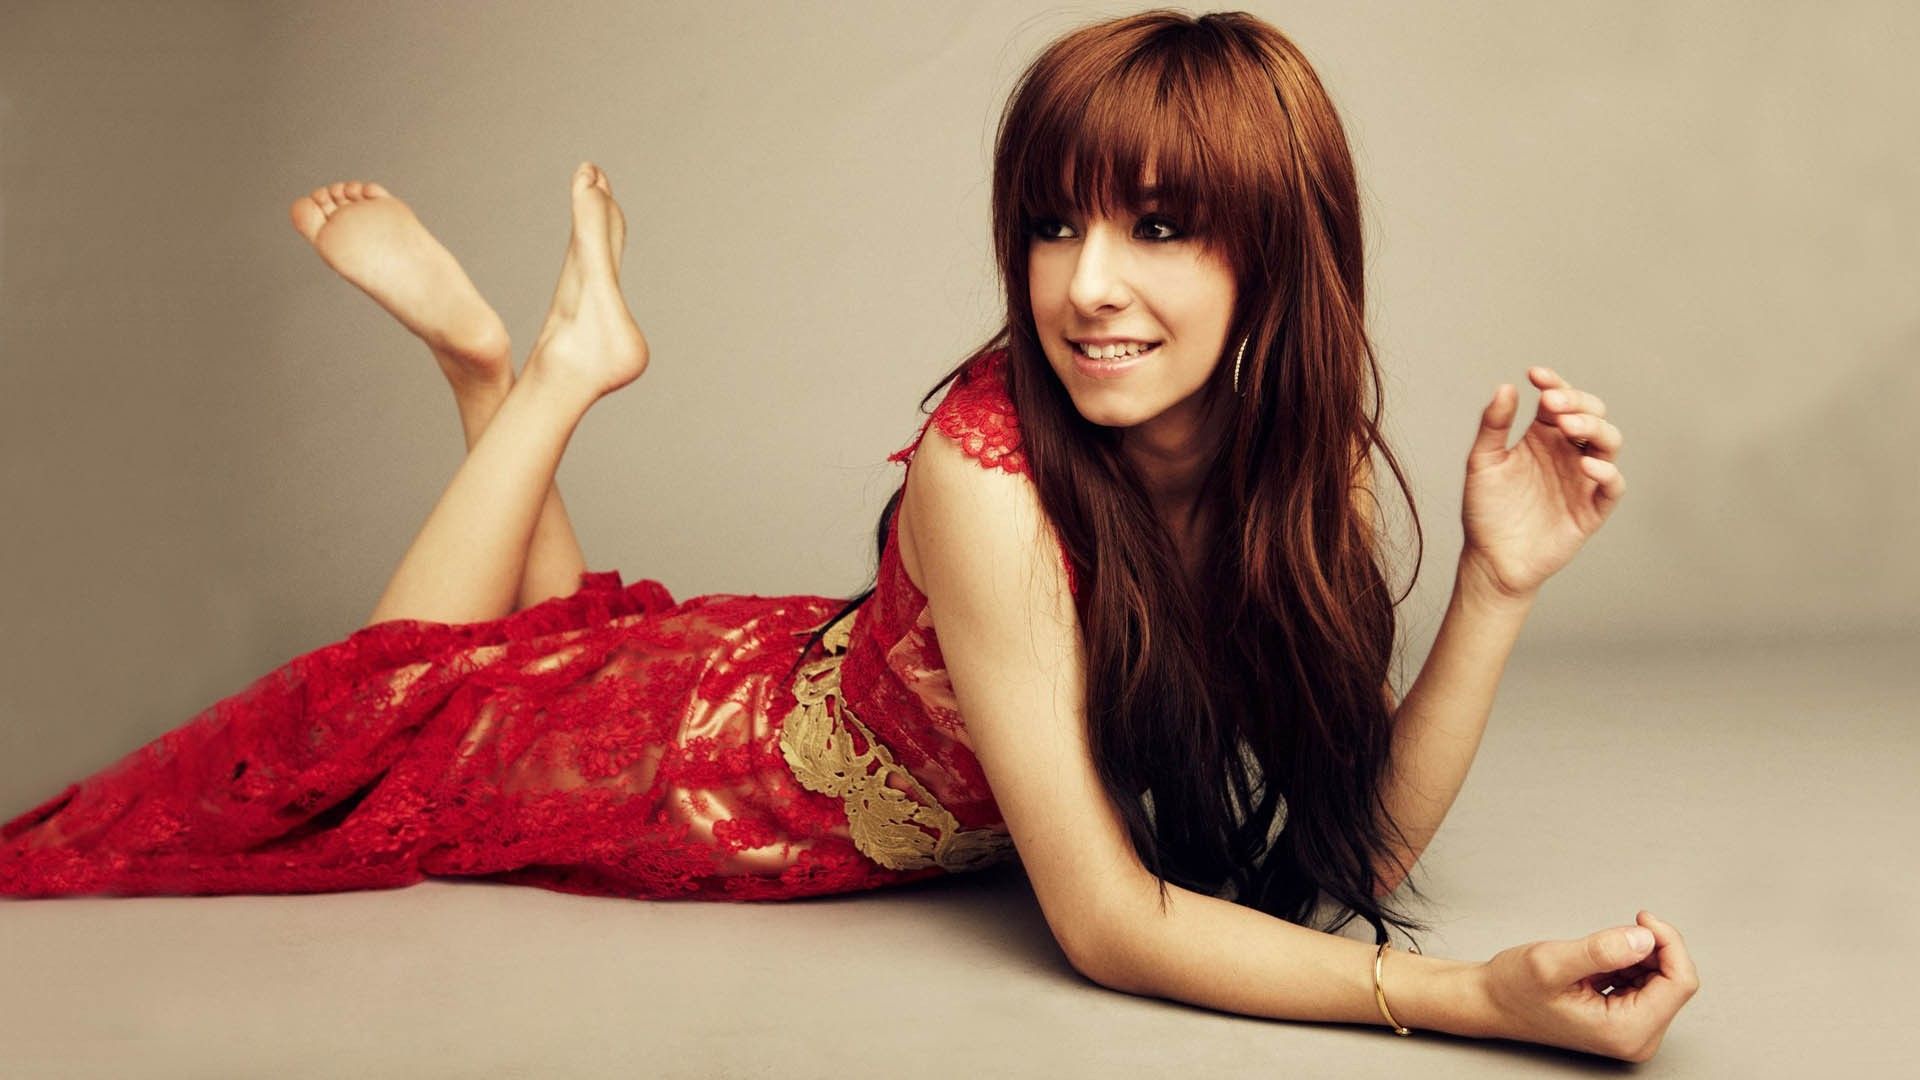 Model Christina Grimmie wallpapers and images - wallpapers